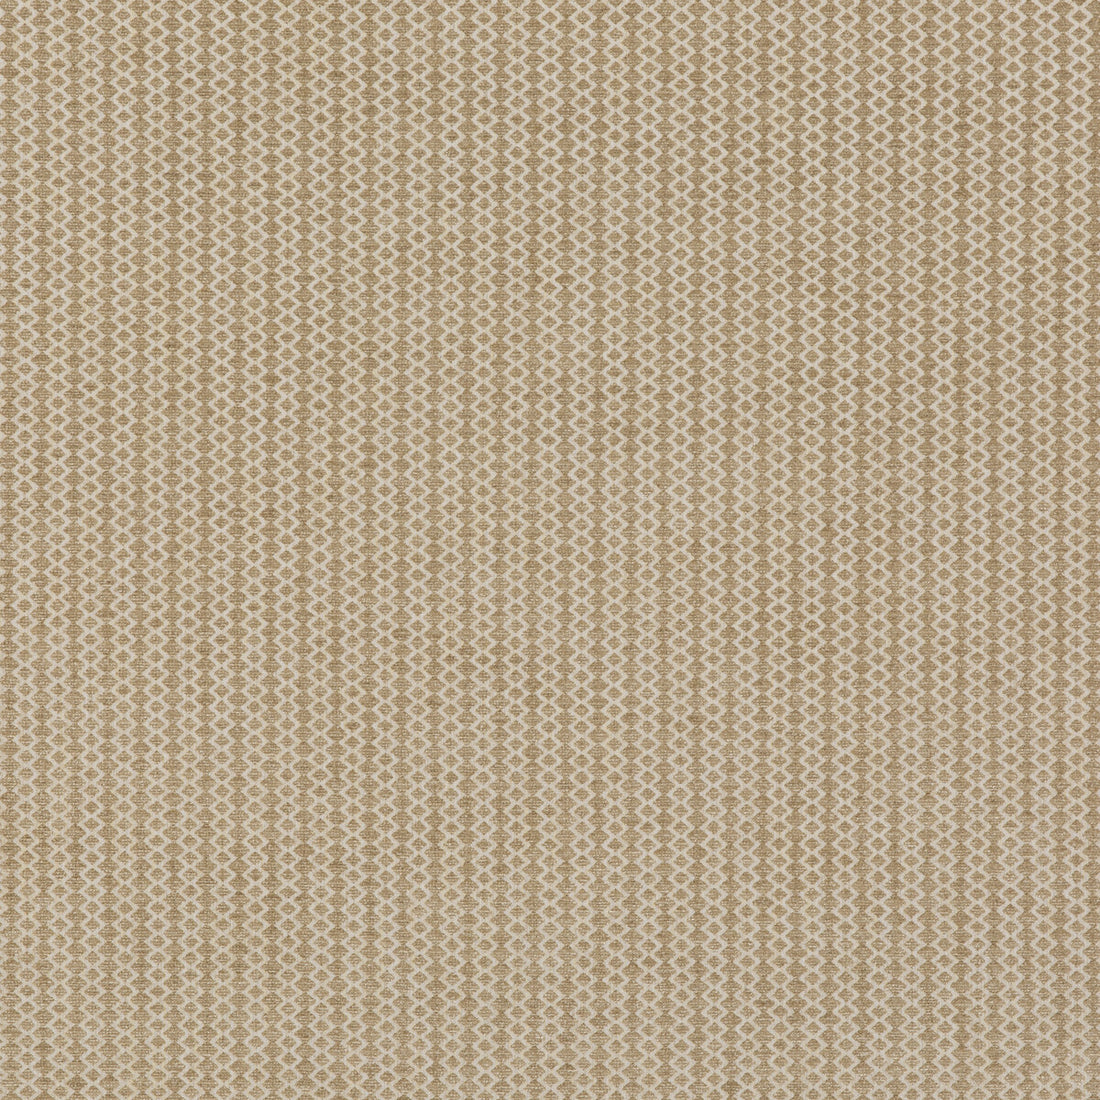 Harwood fabric in sand color - pattern BF10958.130.0 - by G P &amp; J Baker in the Baker House Textures collection